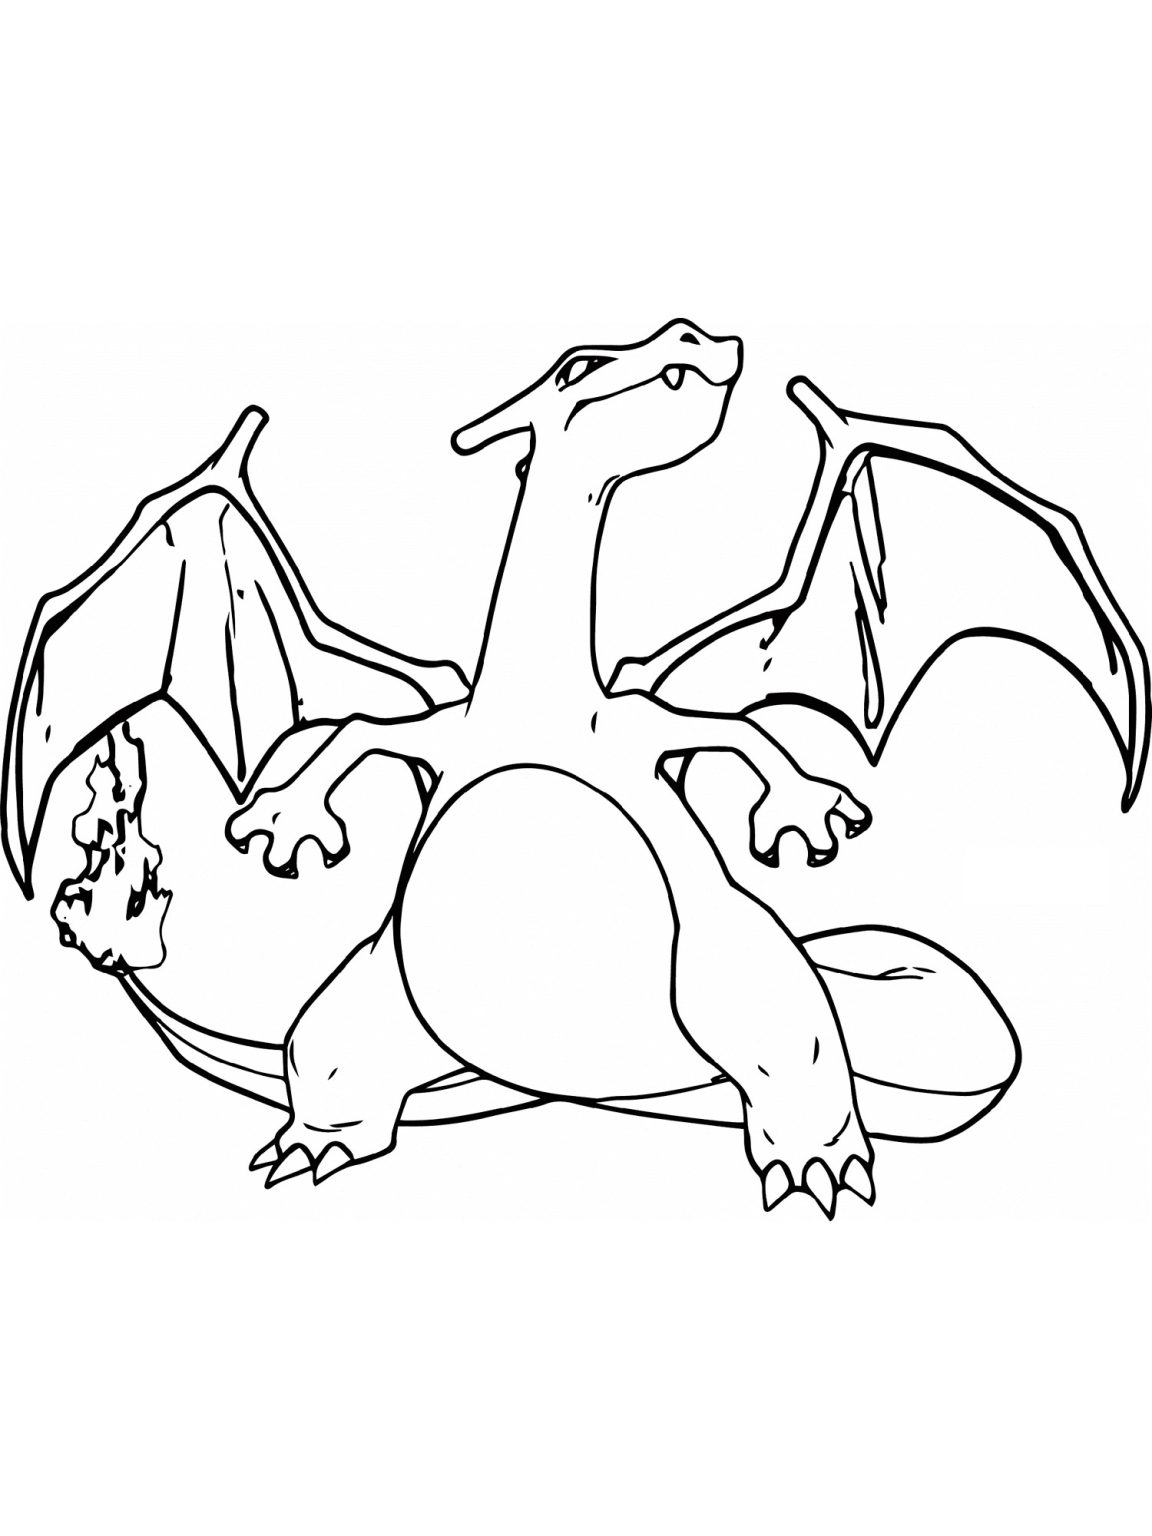 funny-charizard-coloring-pages-for-kids-gbcoloring